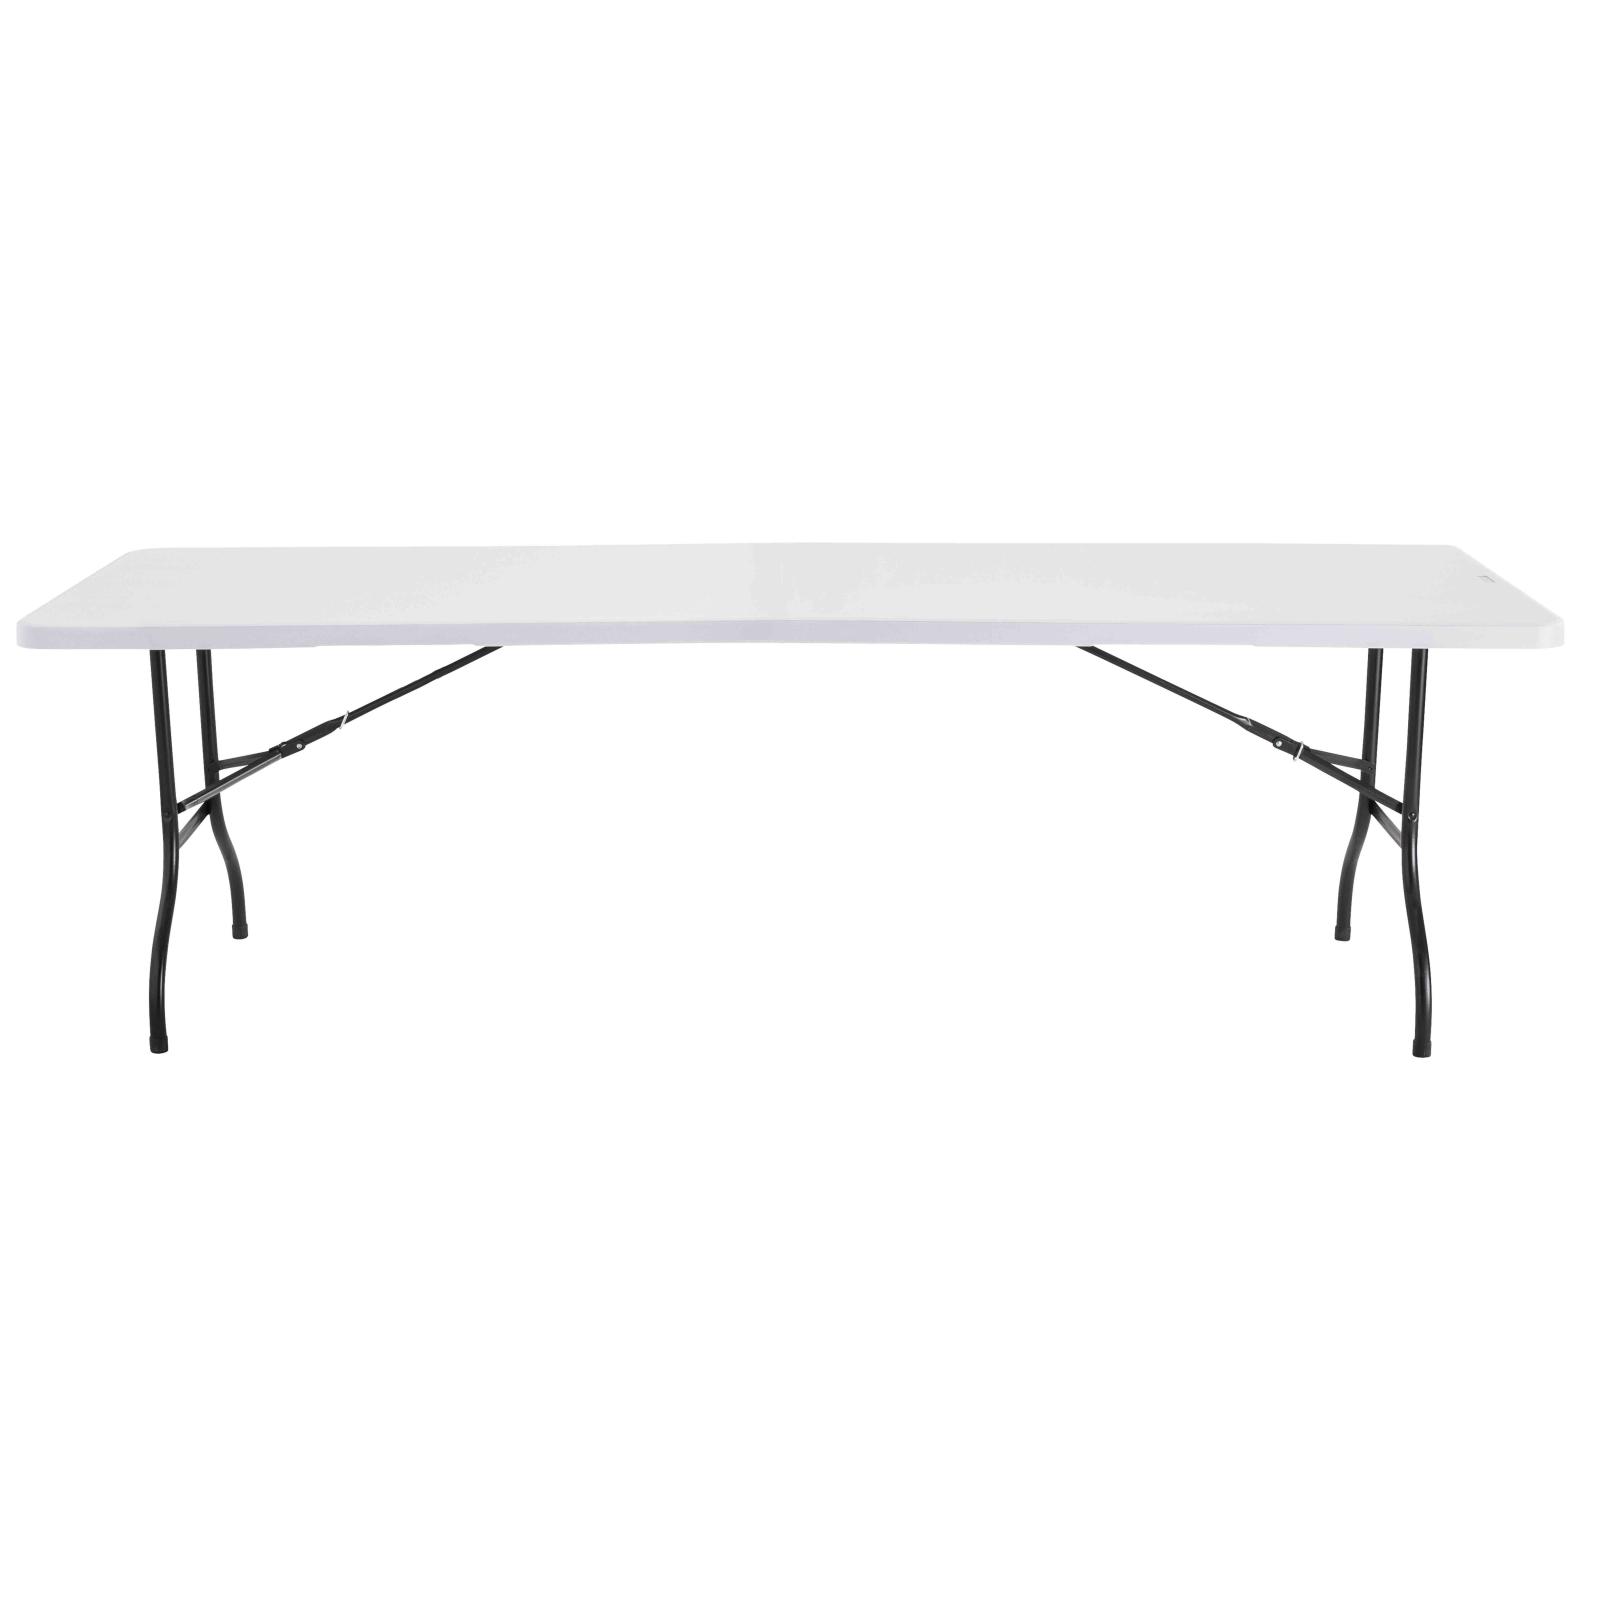 Table mobile plateau rabattable Serenity 240 x 120 cm Gris – Pied